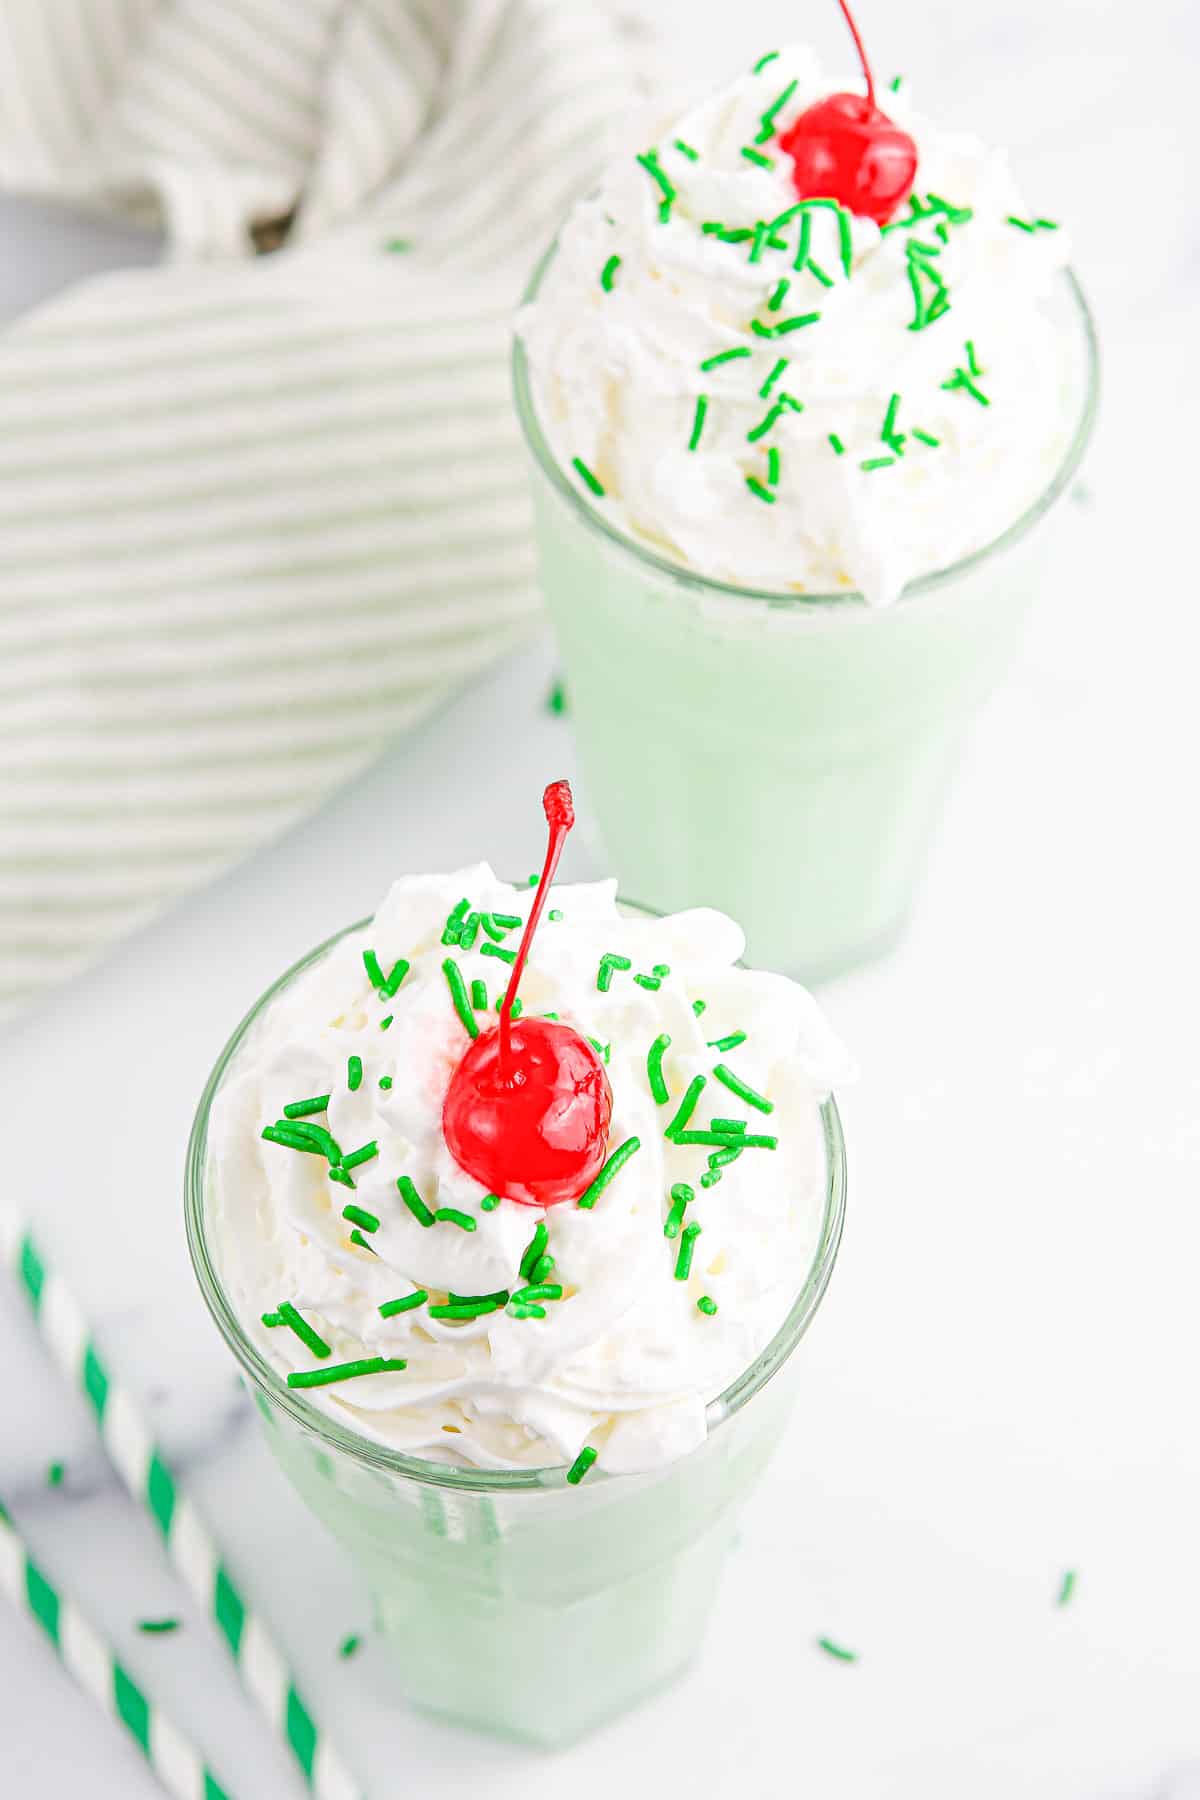 Two green shamrock shakes topped with whipped cream, cherries and sprinkles on a white background with a light green and white striped towel.